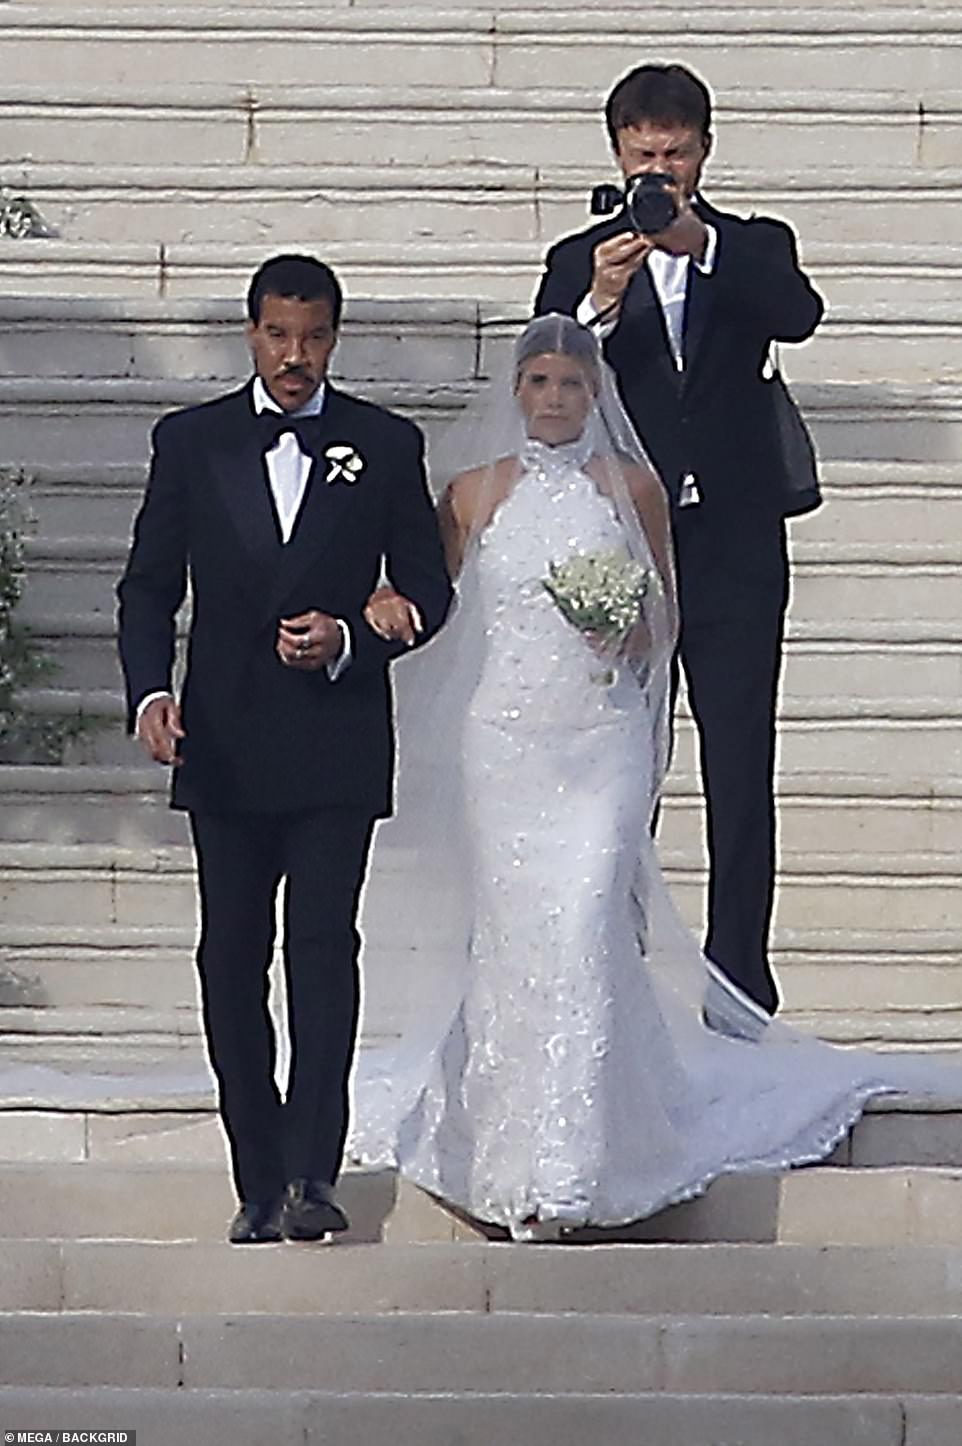 Stunning: On her big day, the model, 24, looked sensational in a beaded ivory gown as her dad sweetly walked her down a flight of stairs as she prepared to marry British music executive, Elliot Grainge